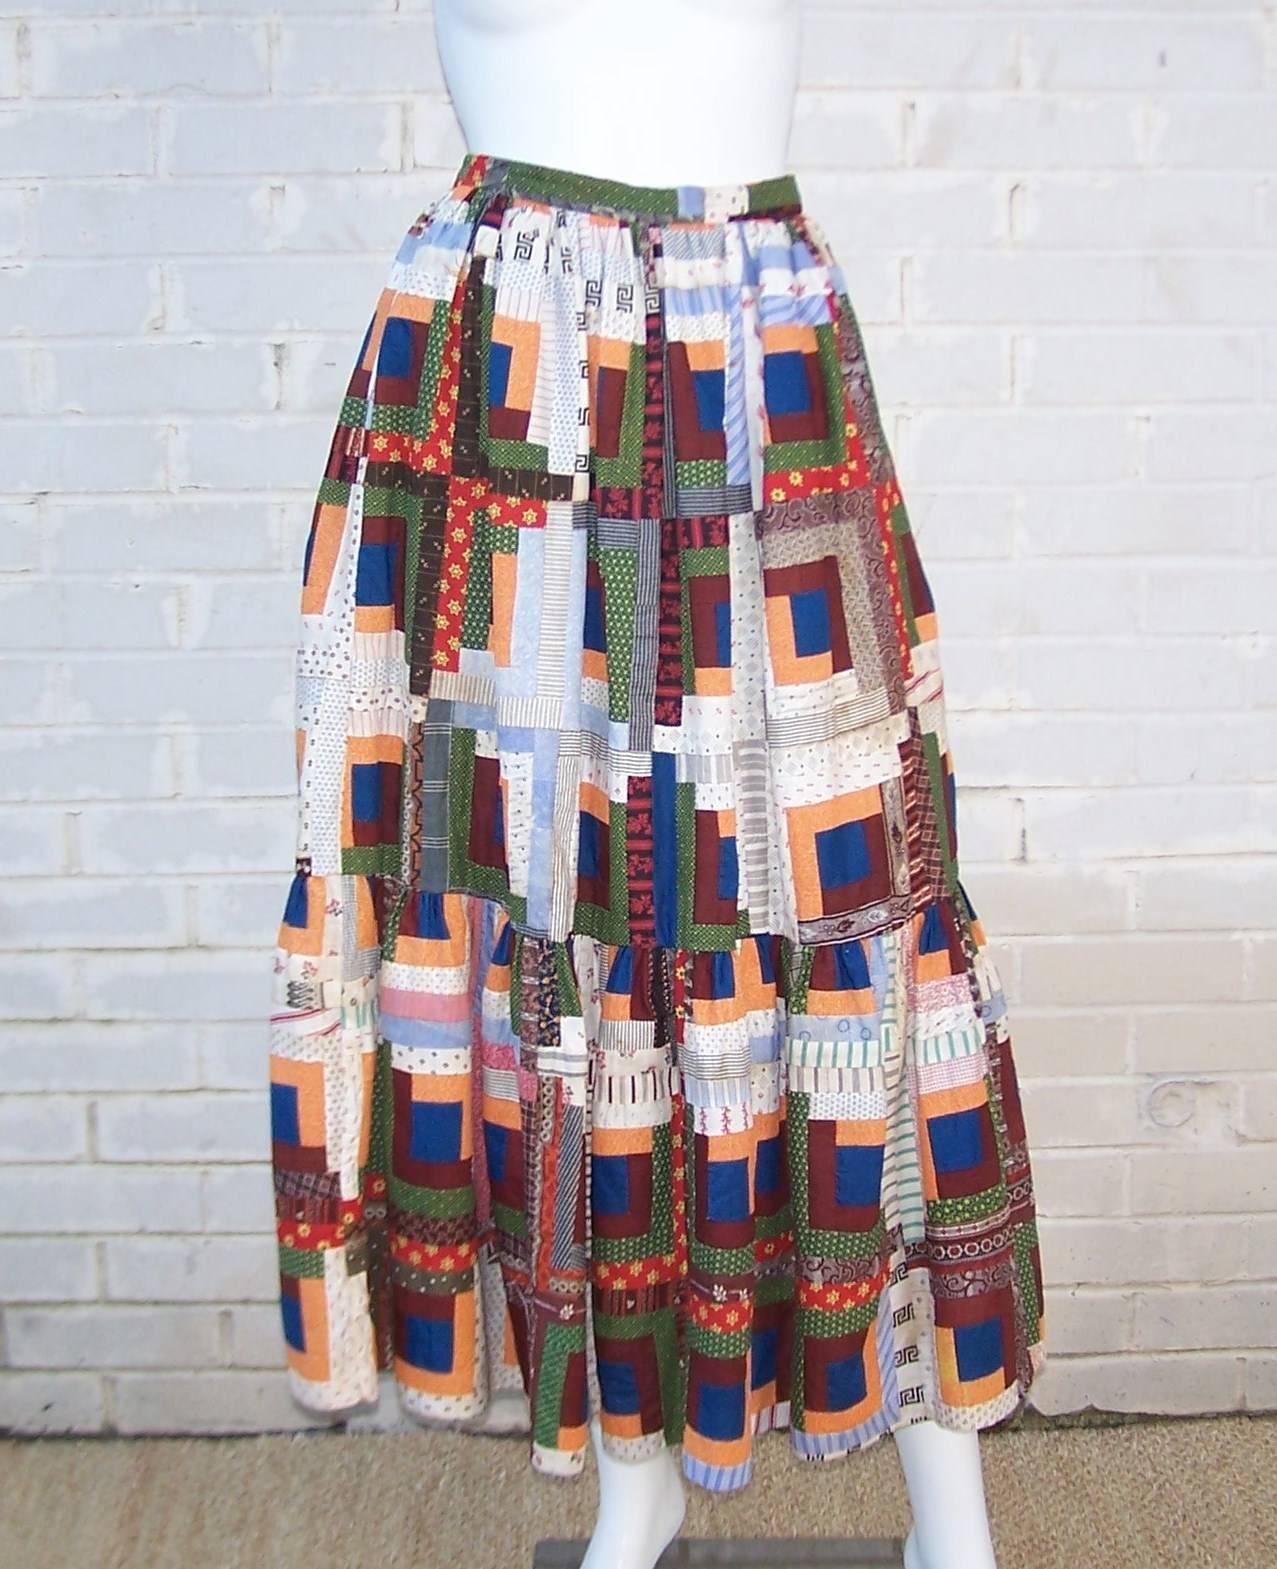 Leave it to Ralph Lauren to make donning a quilt around your waist fashionable...he has succeeded with this precious prairie skirt!  The purposely aged fabric is a patchwork of colorful patterns pleated and layered to created volume and nostalgia. 